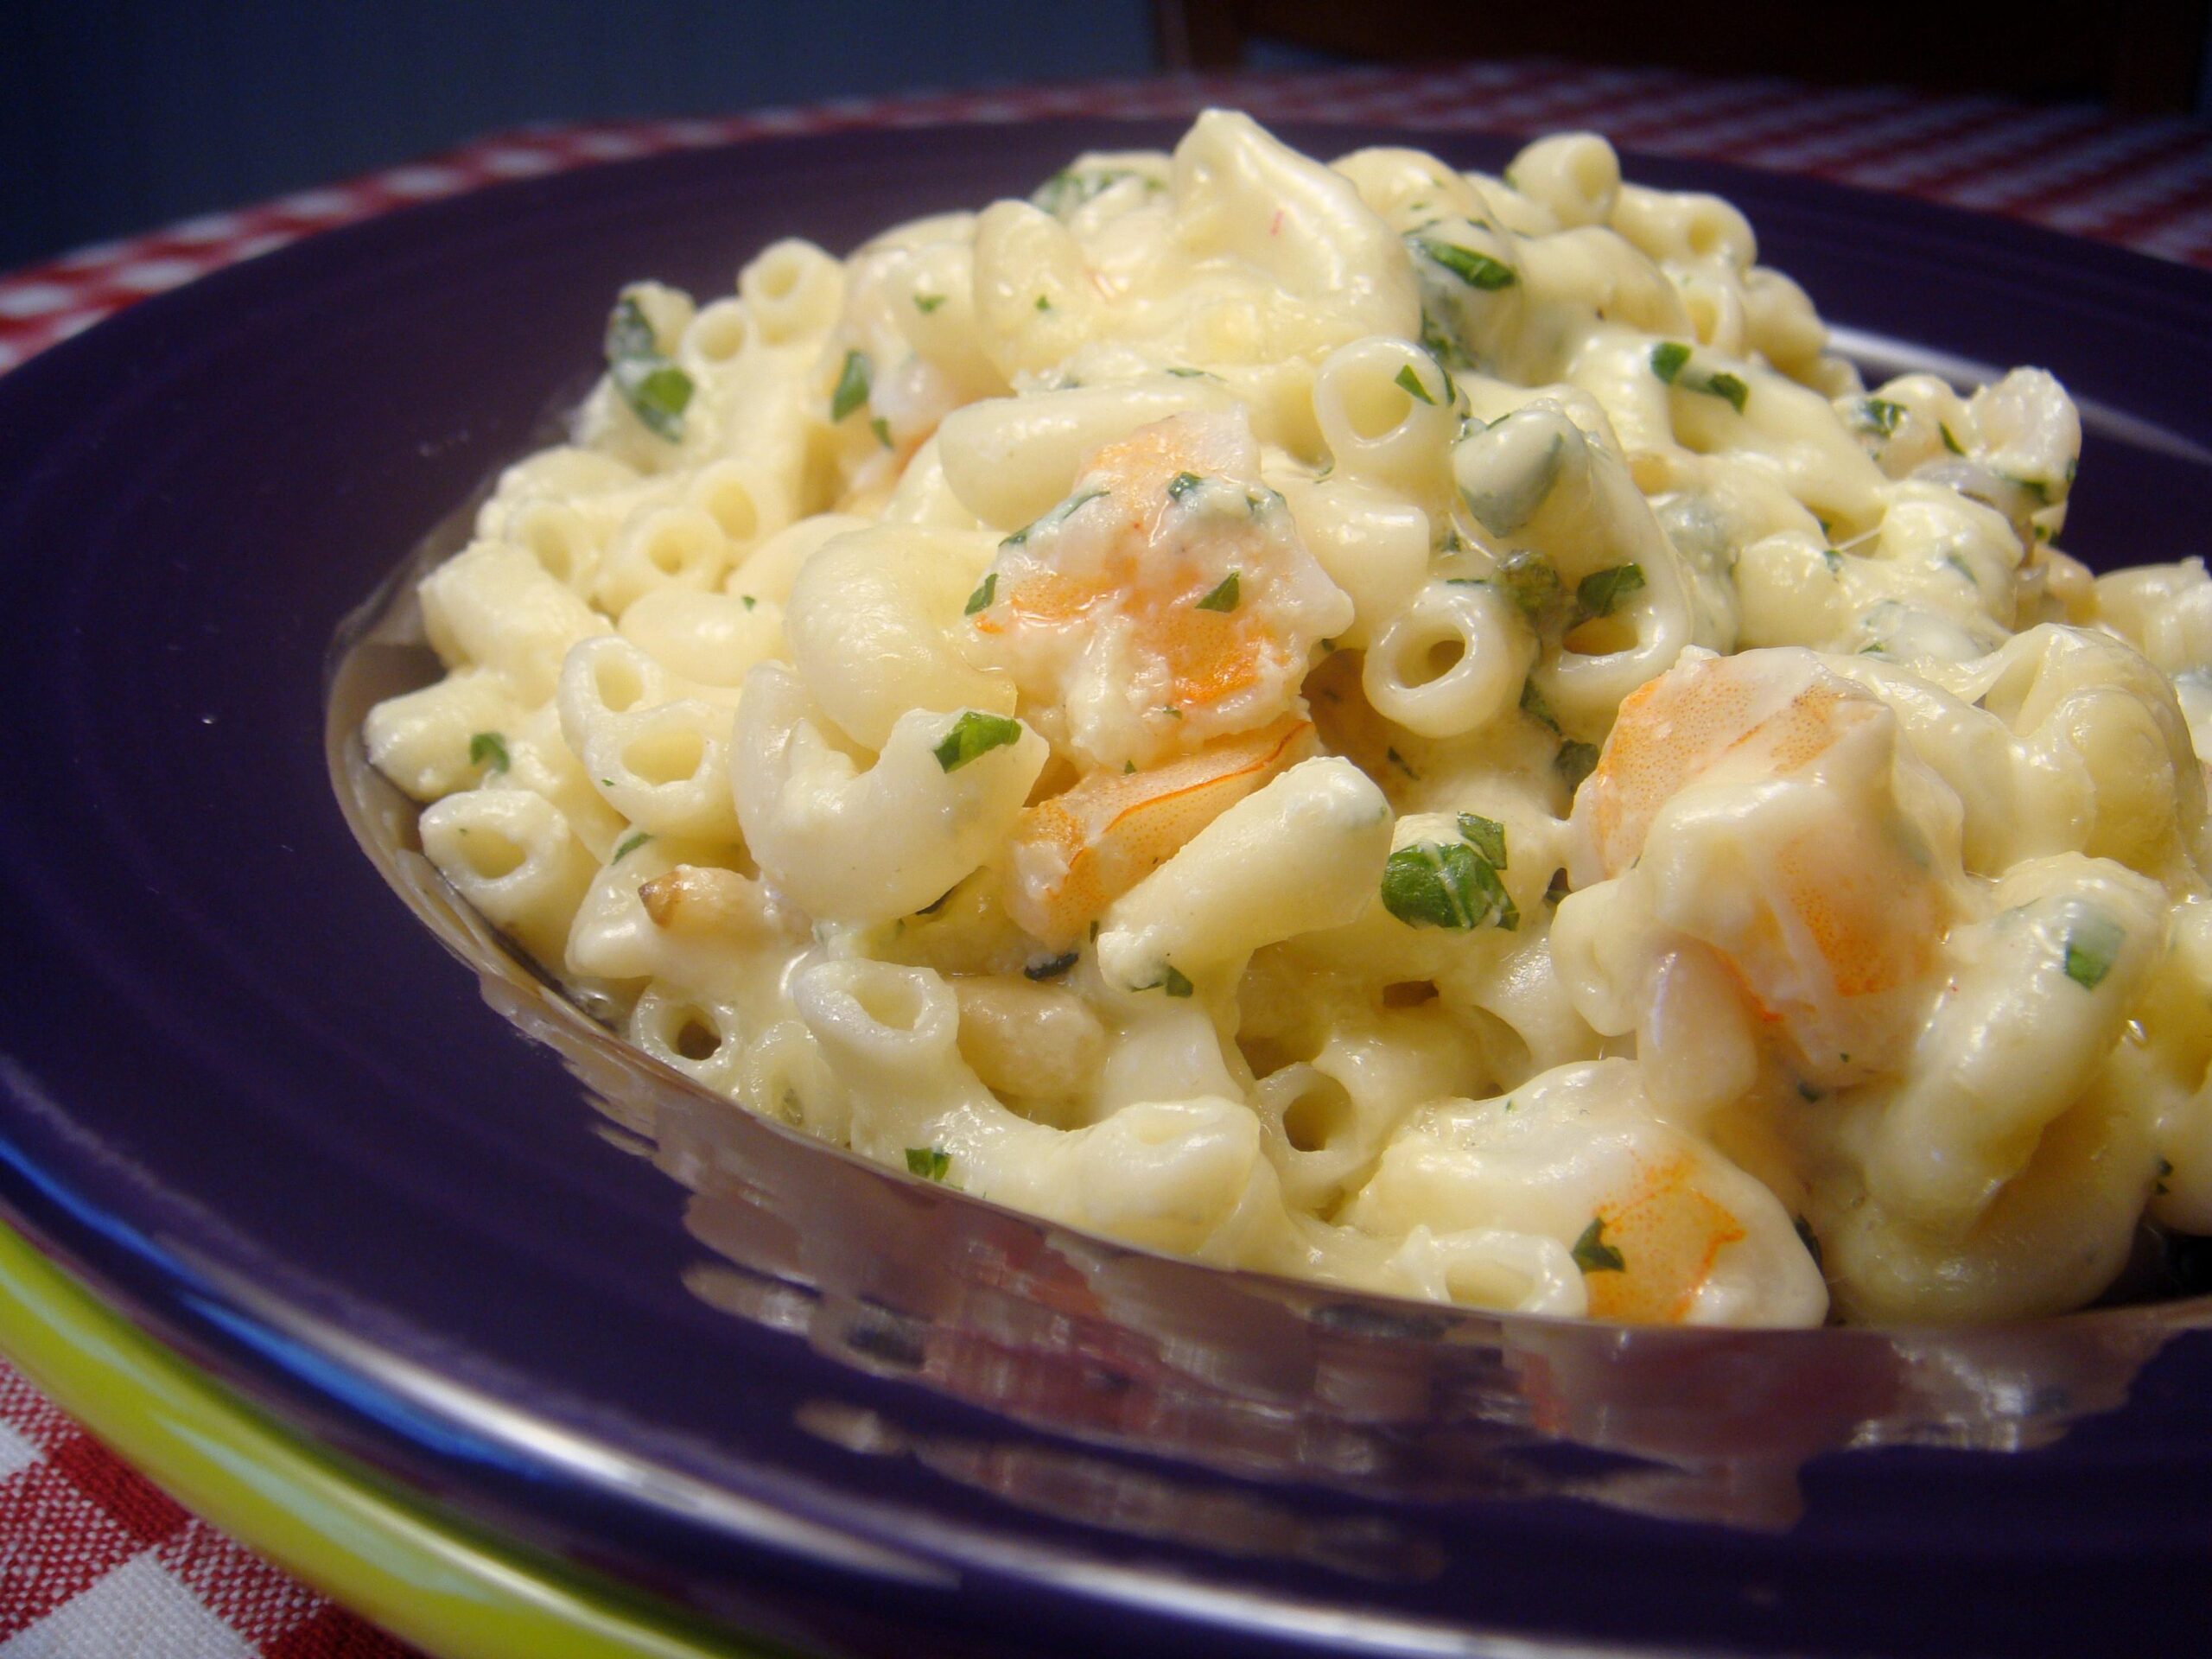  Get ready to indulge in this elegant mac and cheese.